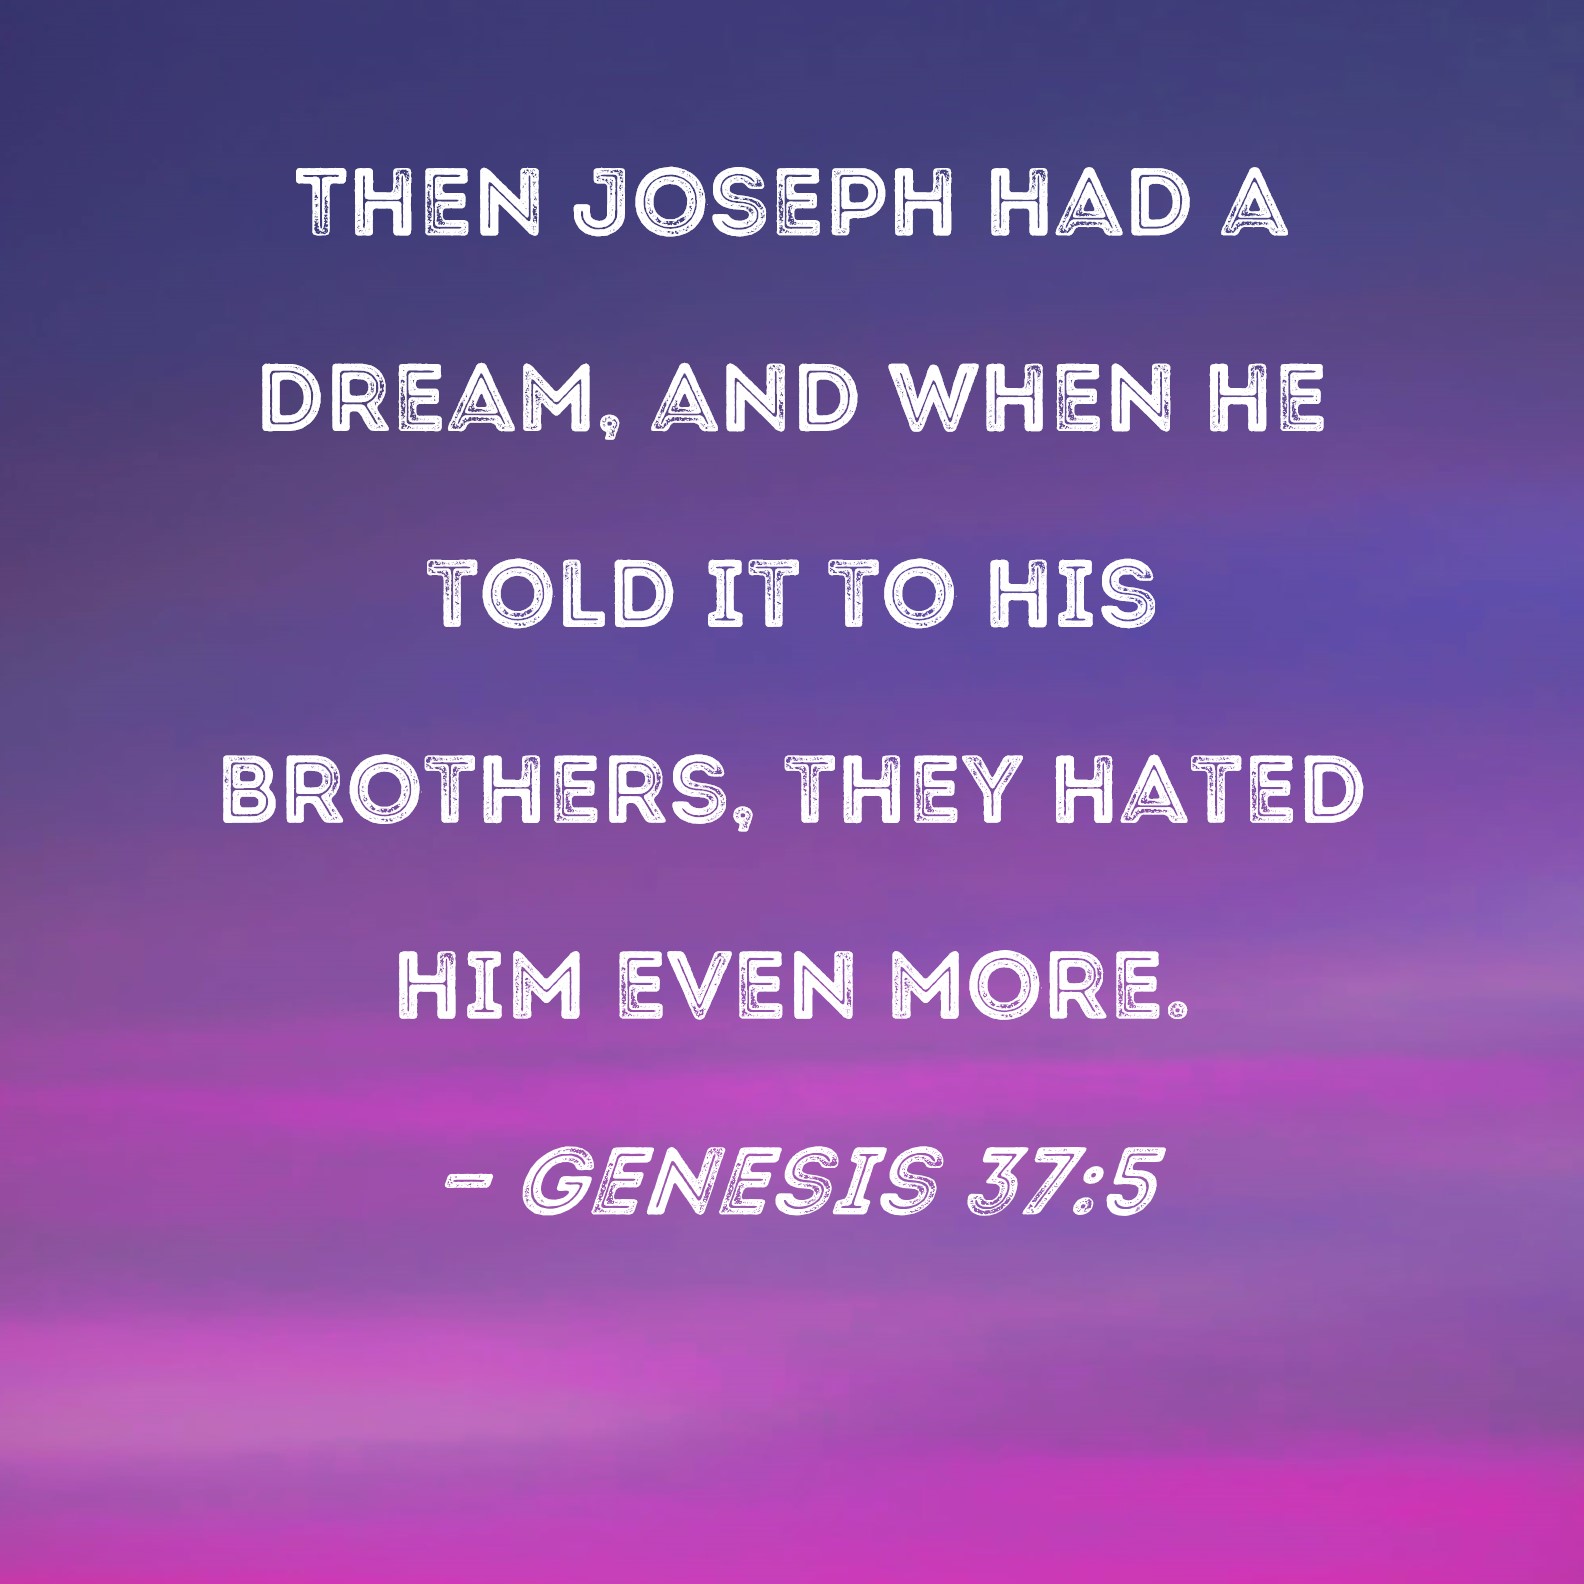 joseph from the bible dream